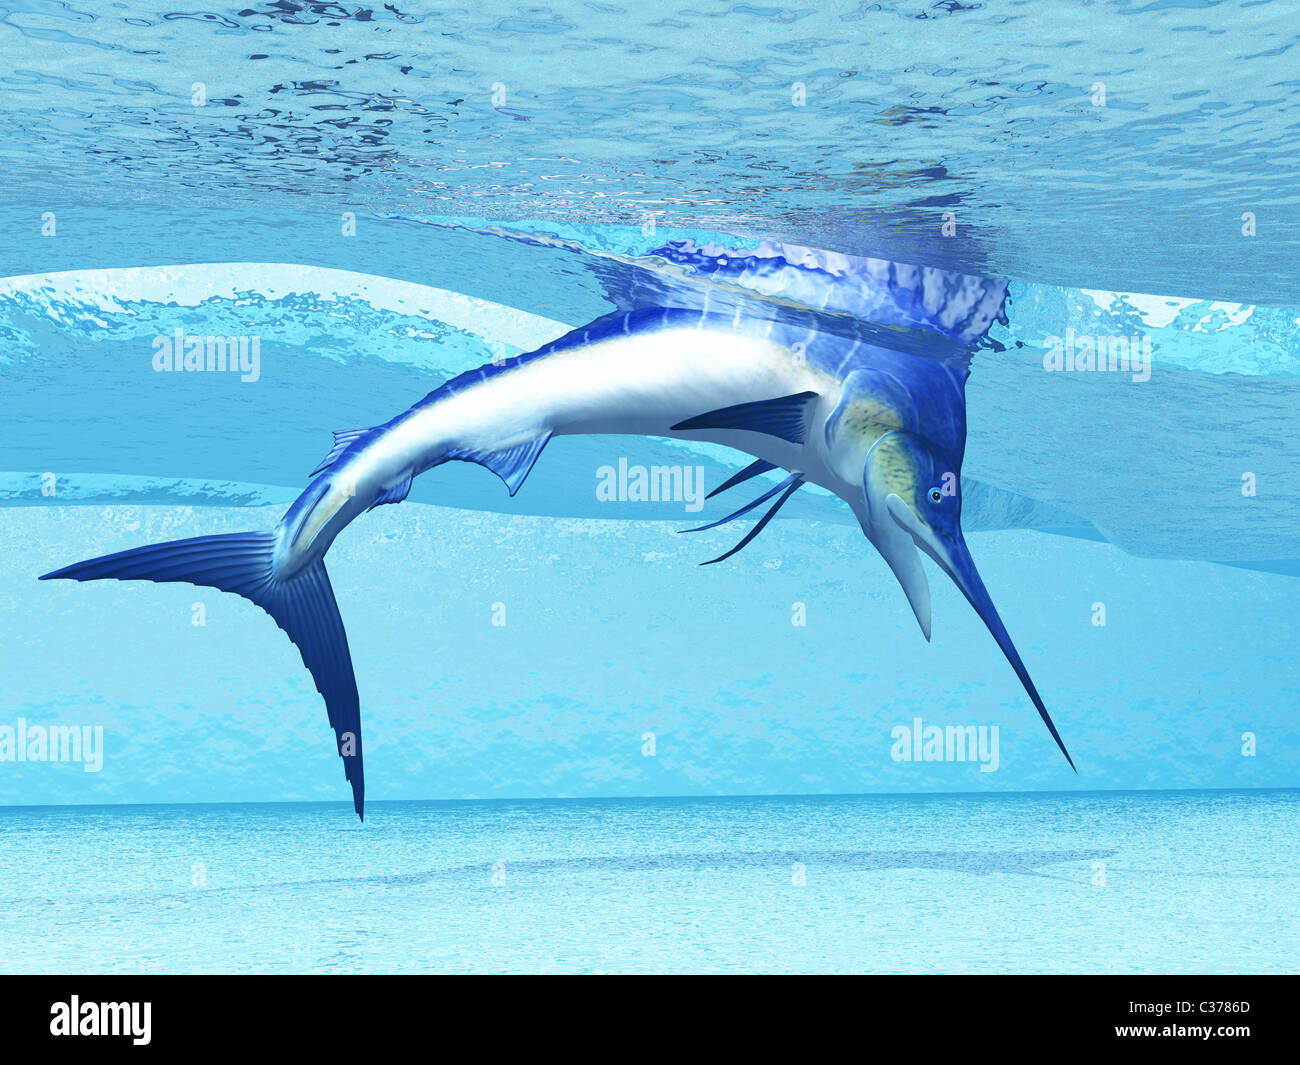 A Marlin dives in shallow waves looking for fish to eat. Stock Photo